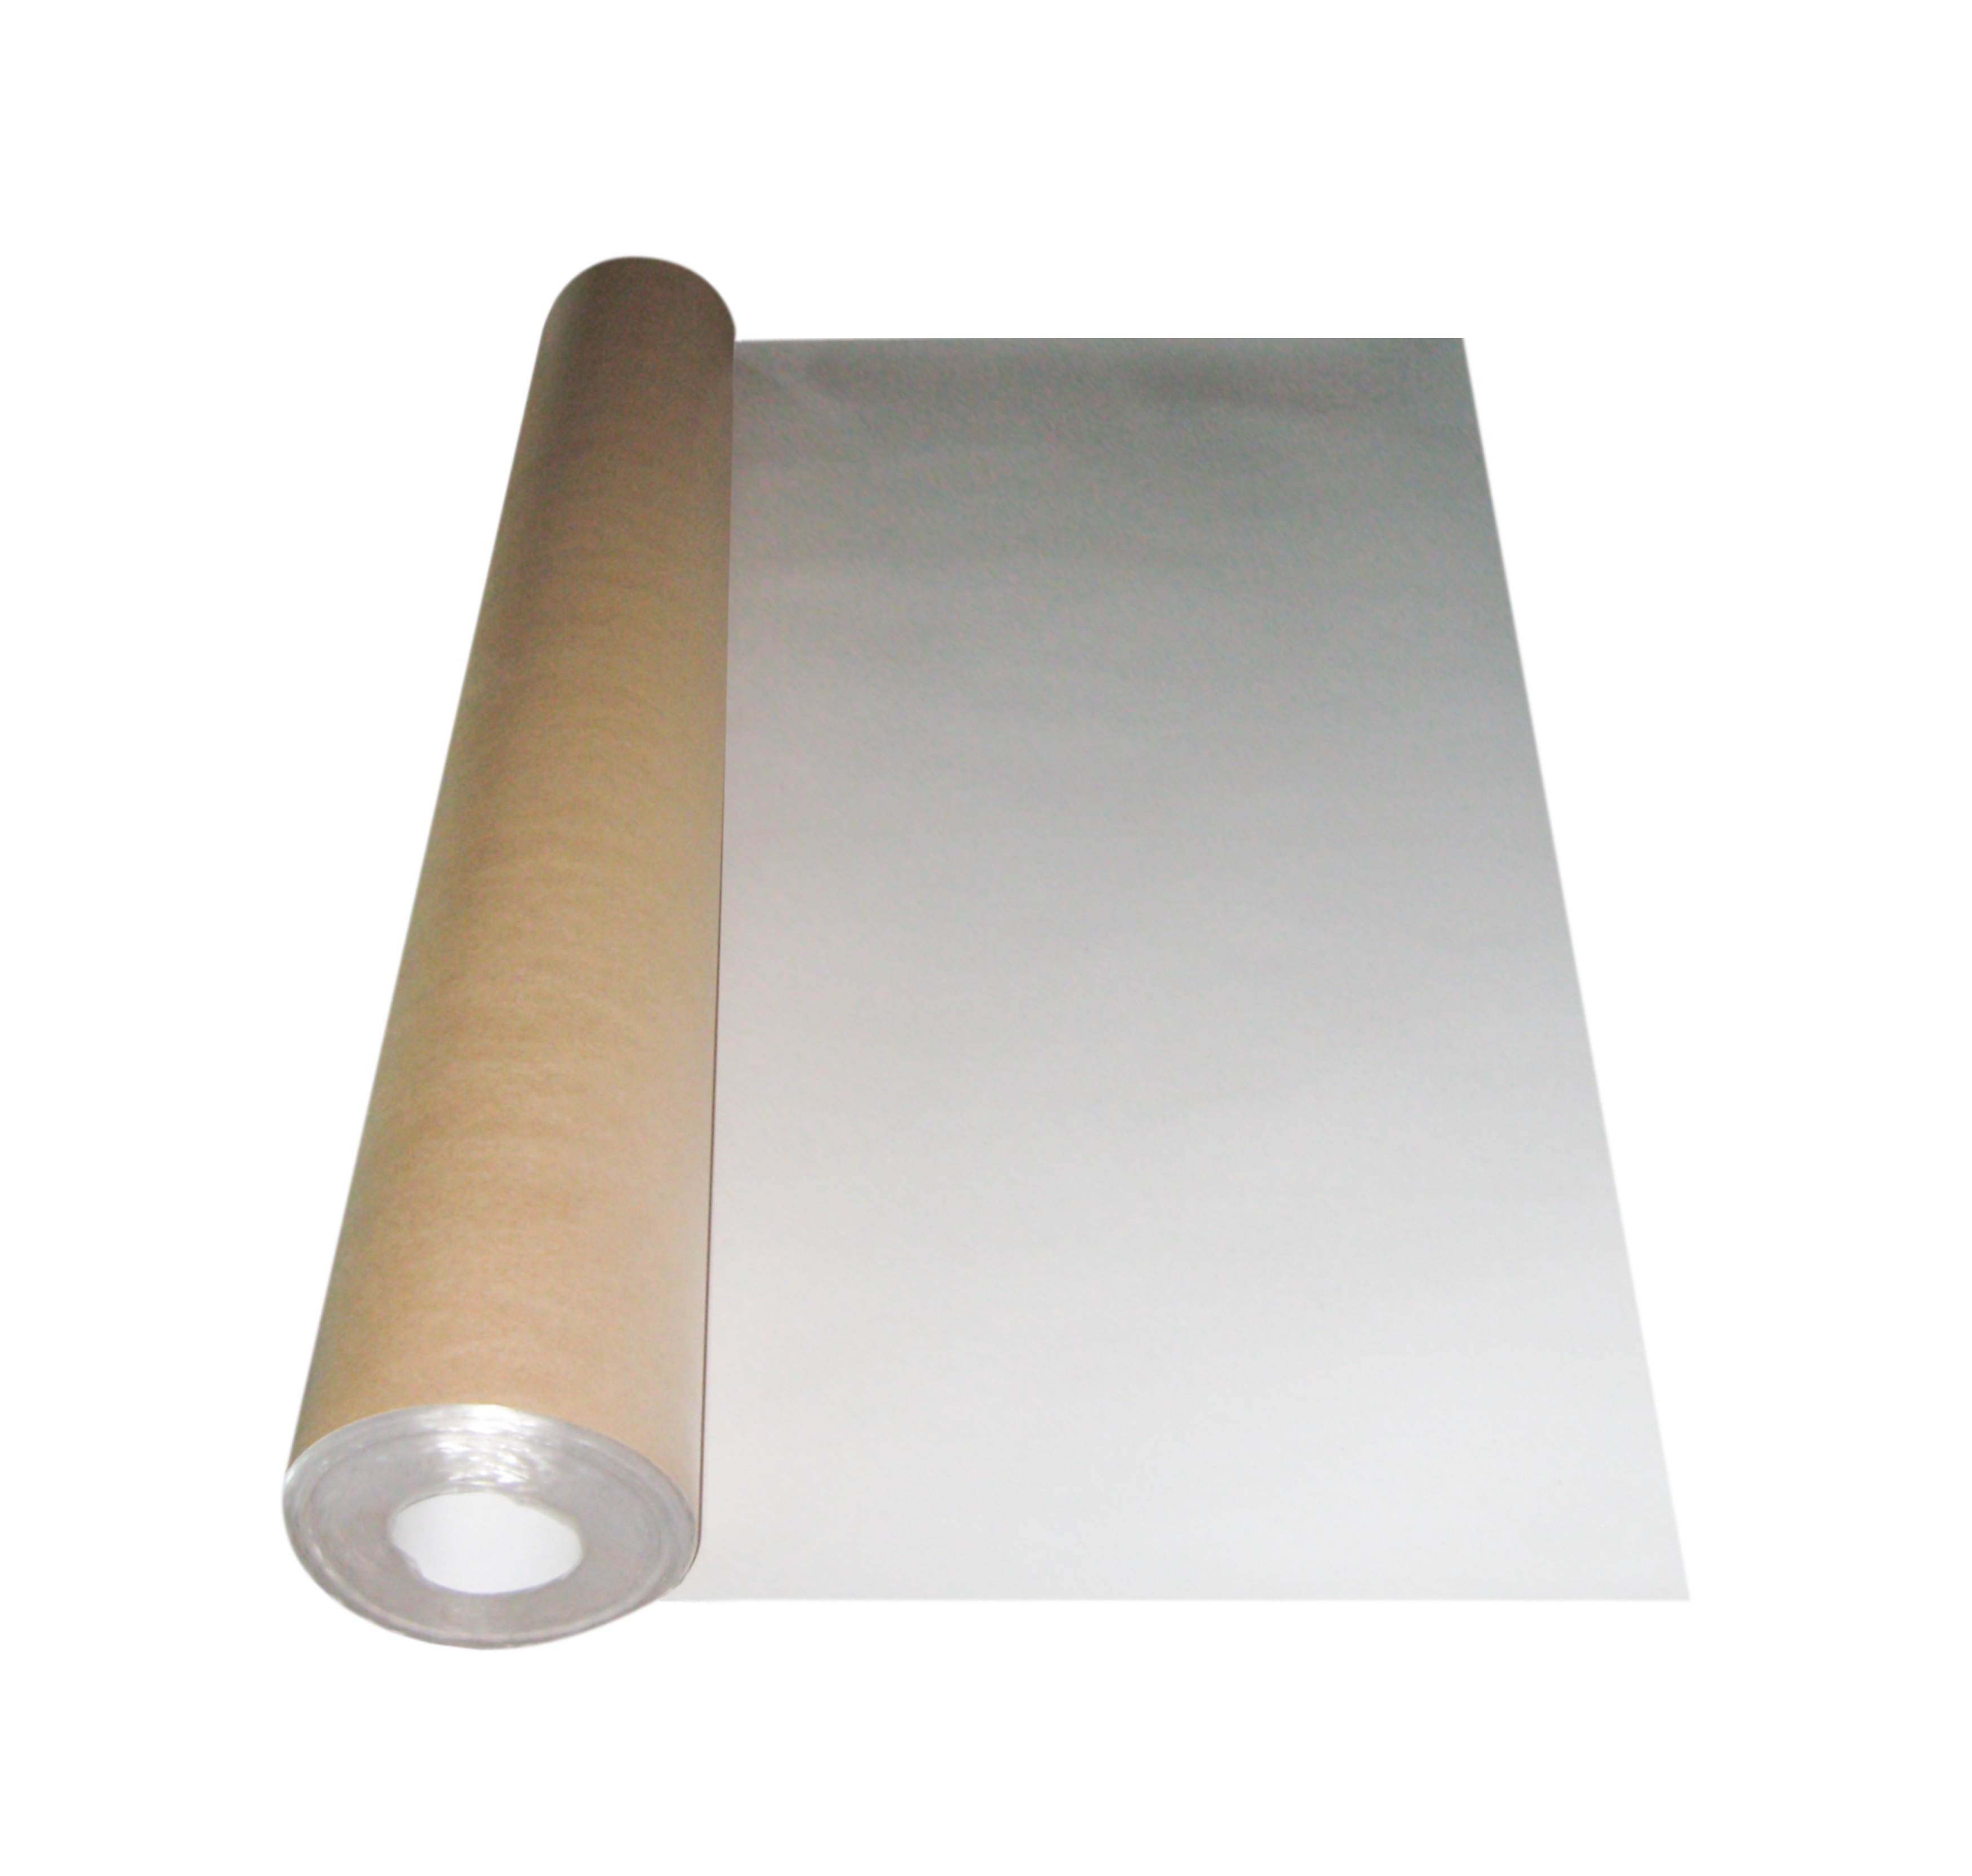 Multilayer paper role